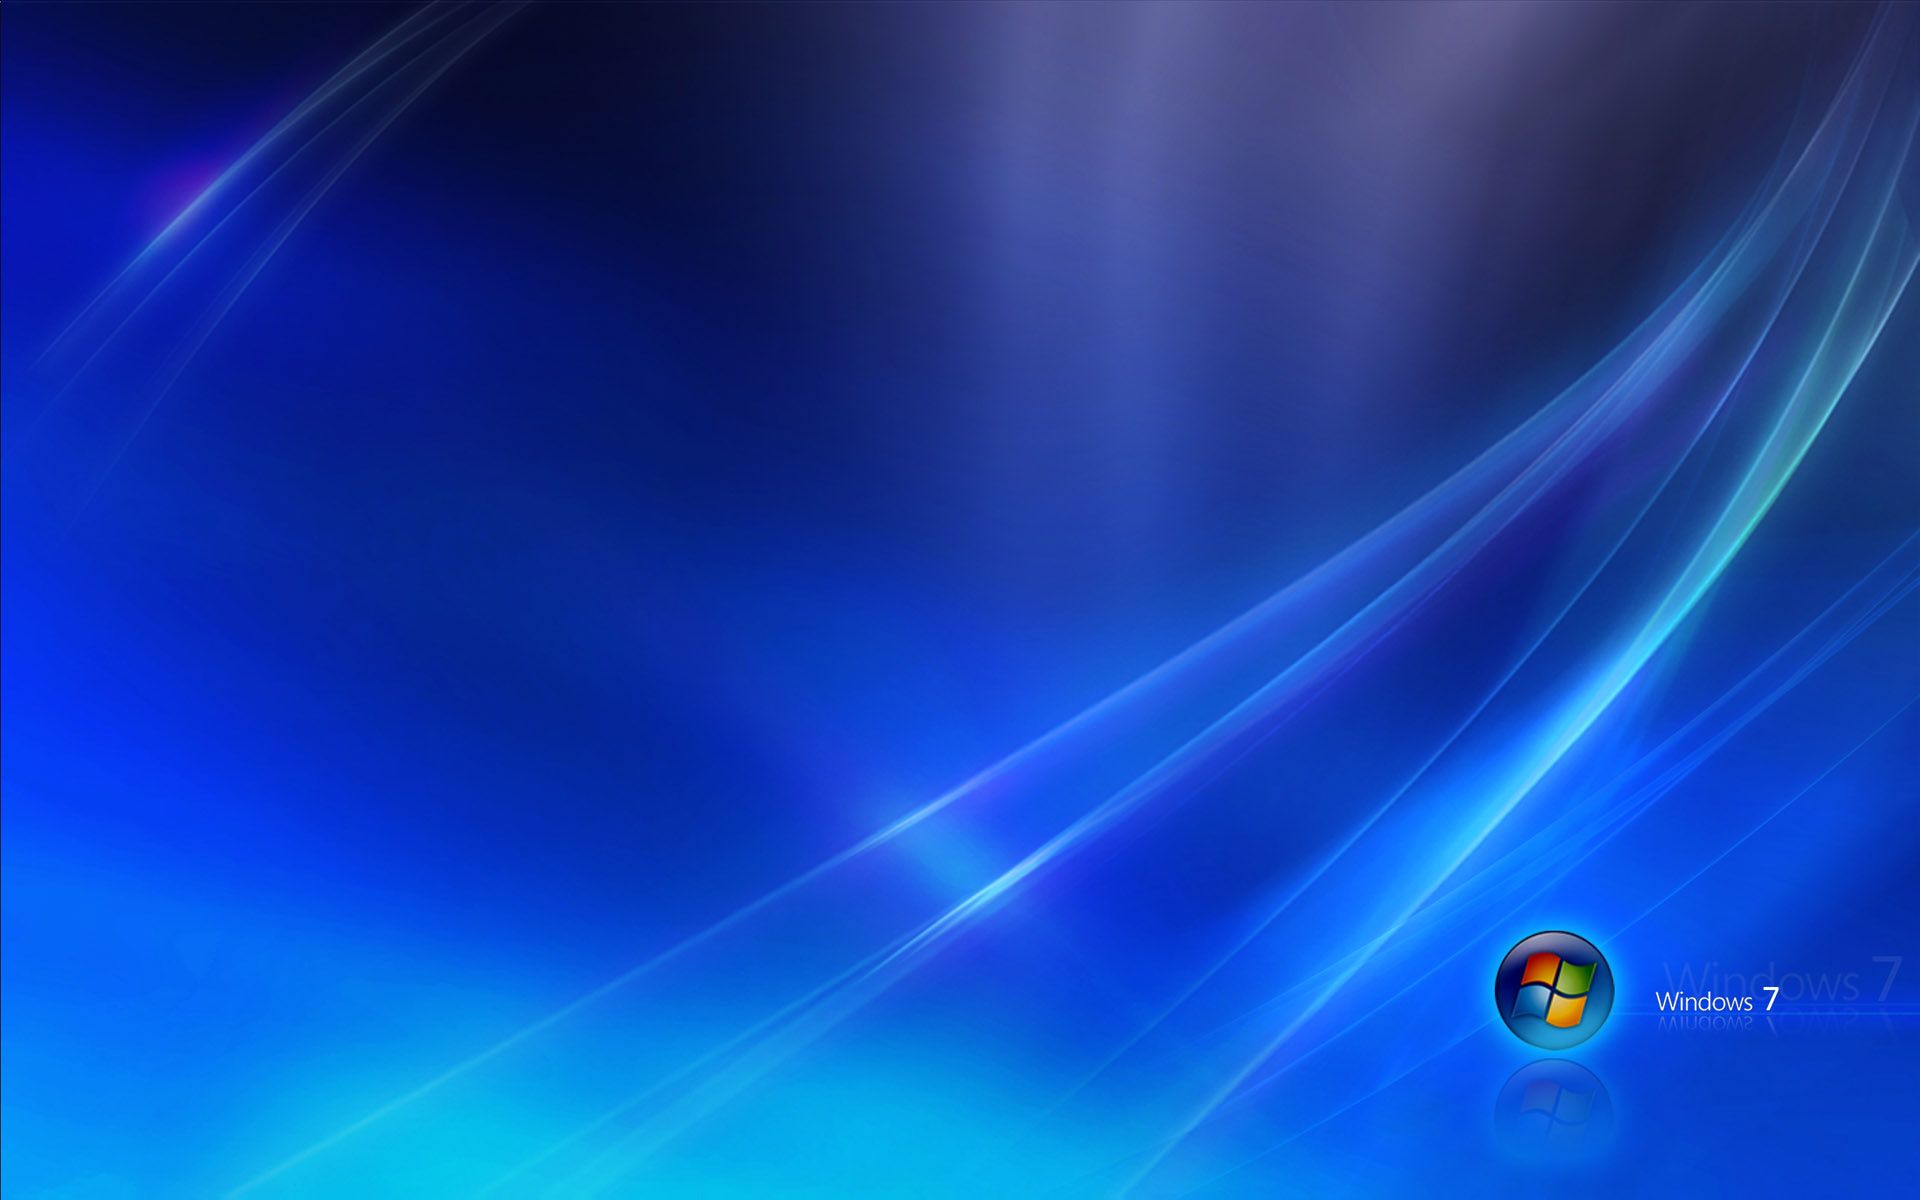 Microsoft Windows Seven wallpapers and images - wallpapers ...